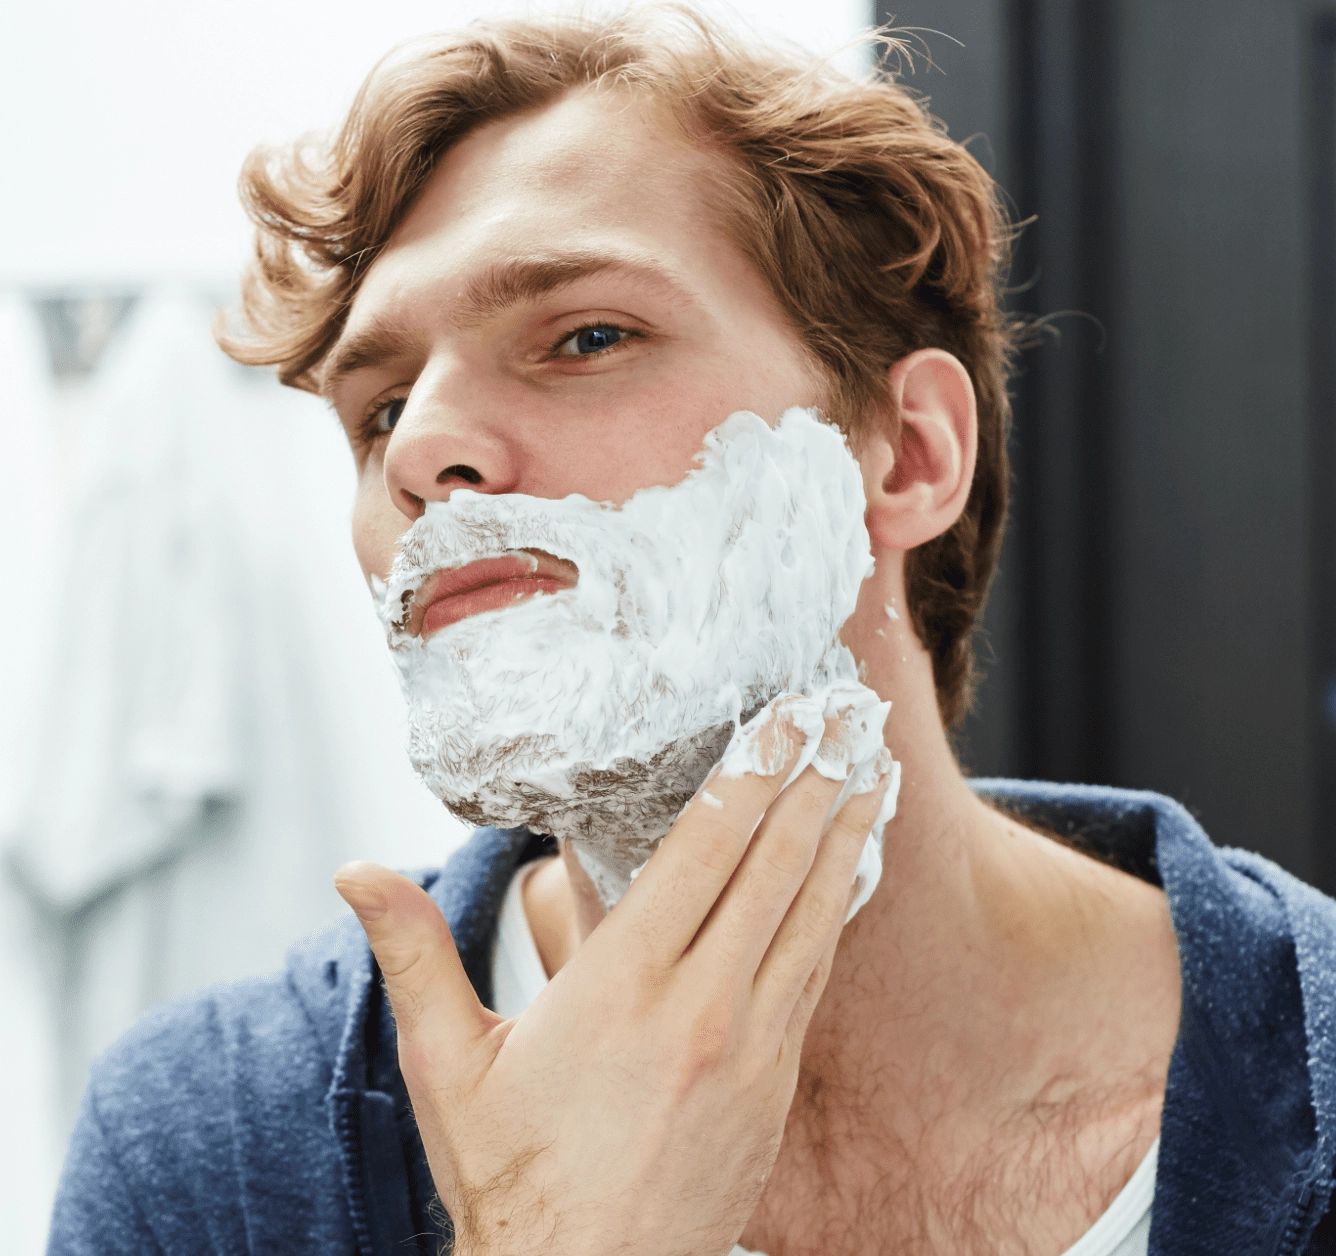 Helps applying shave gel smoothly